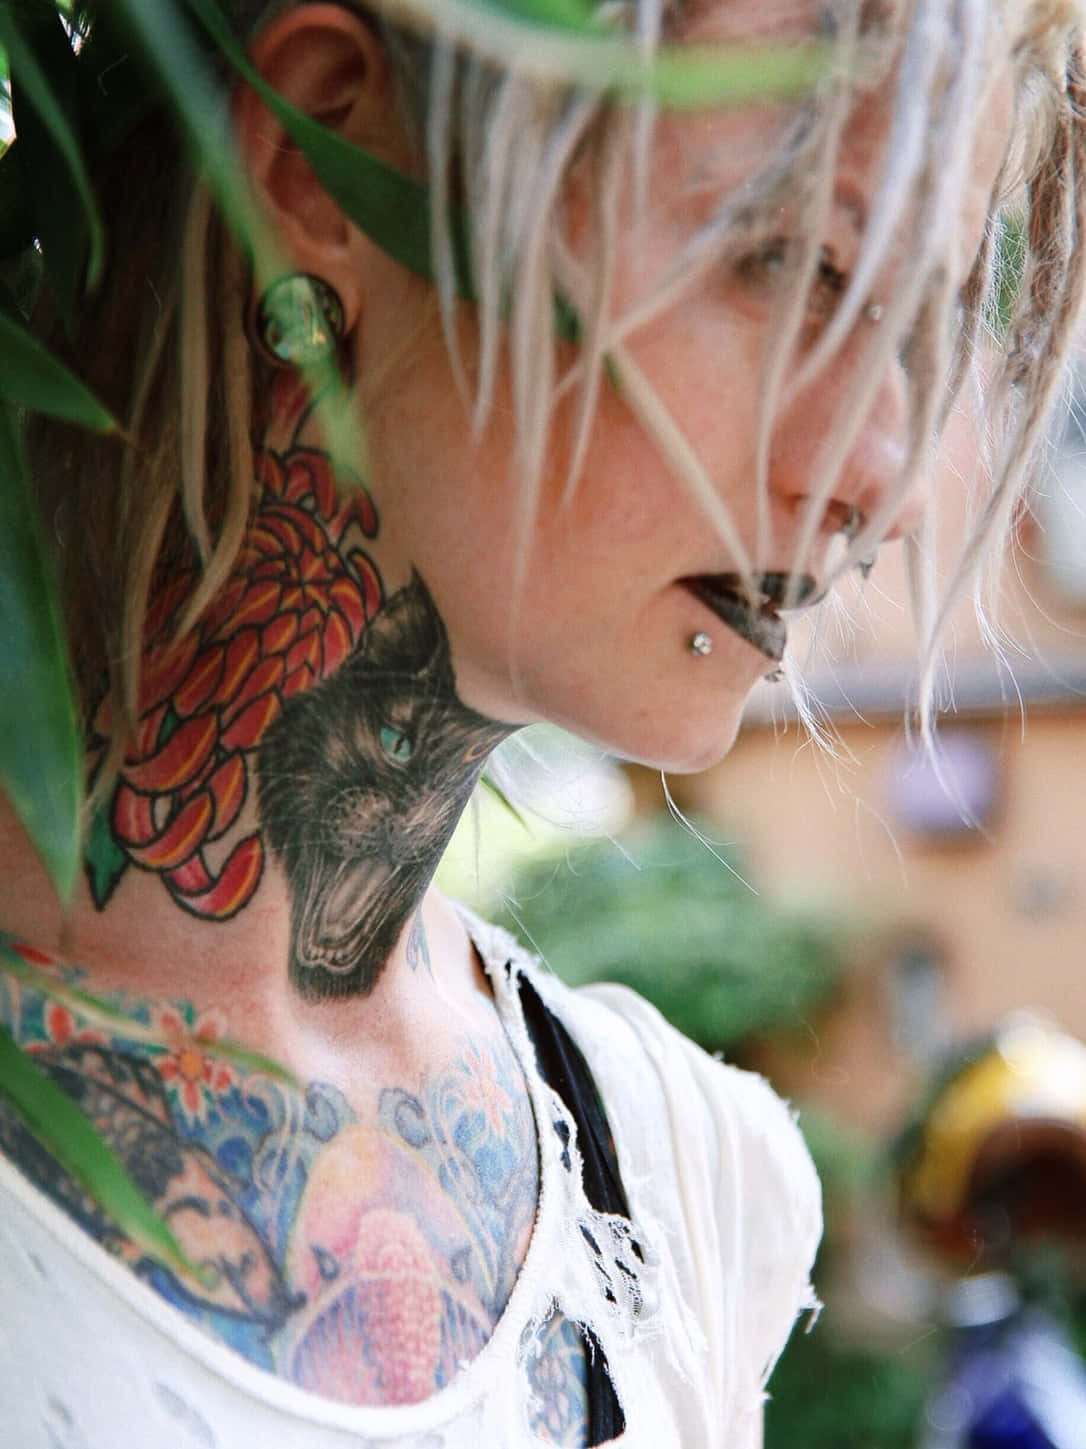 A beautiful tattooed woman looking pensively into the distance.